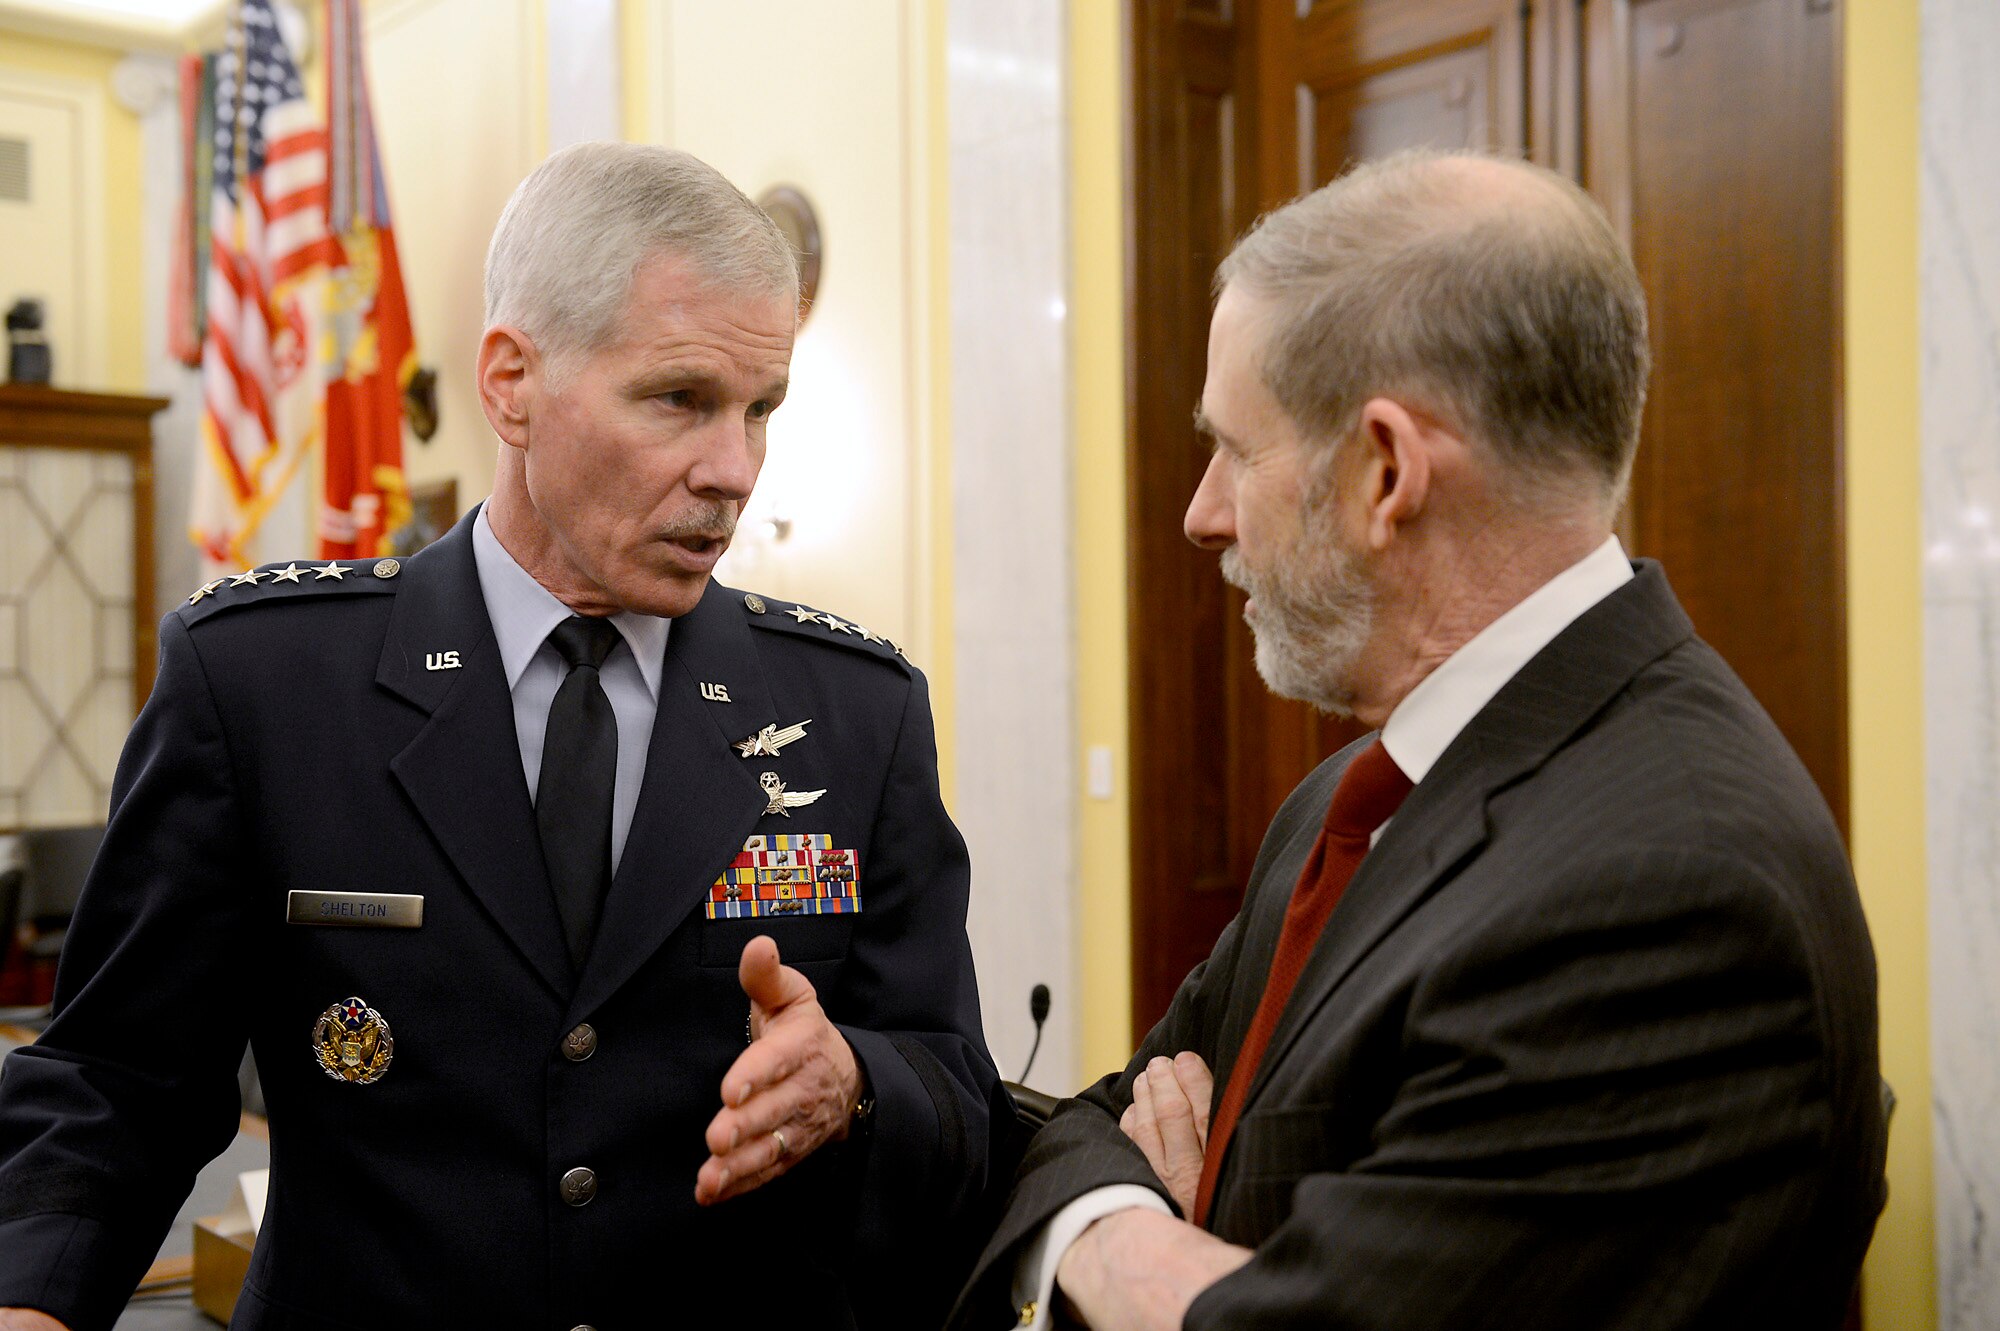 General William L. Shelton talks with Douglas L. Loverro before they testified in front of the U.S. Senate Committee on Armed Services’ Subcommittee on Strategic Forces March 12, 2014, in Washington, D.C.  Shelton and Loverro testified on military space programs in review of the defense authorization request for fiscal. Shelton is the commander of Air Force Space Command and Loverro is the deputy assistant secretary of defense for space policy.  (U.S. Air Force photo/Scott M. Ash)